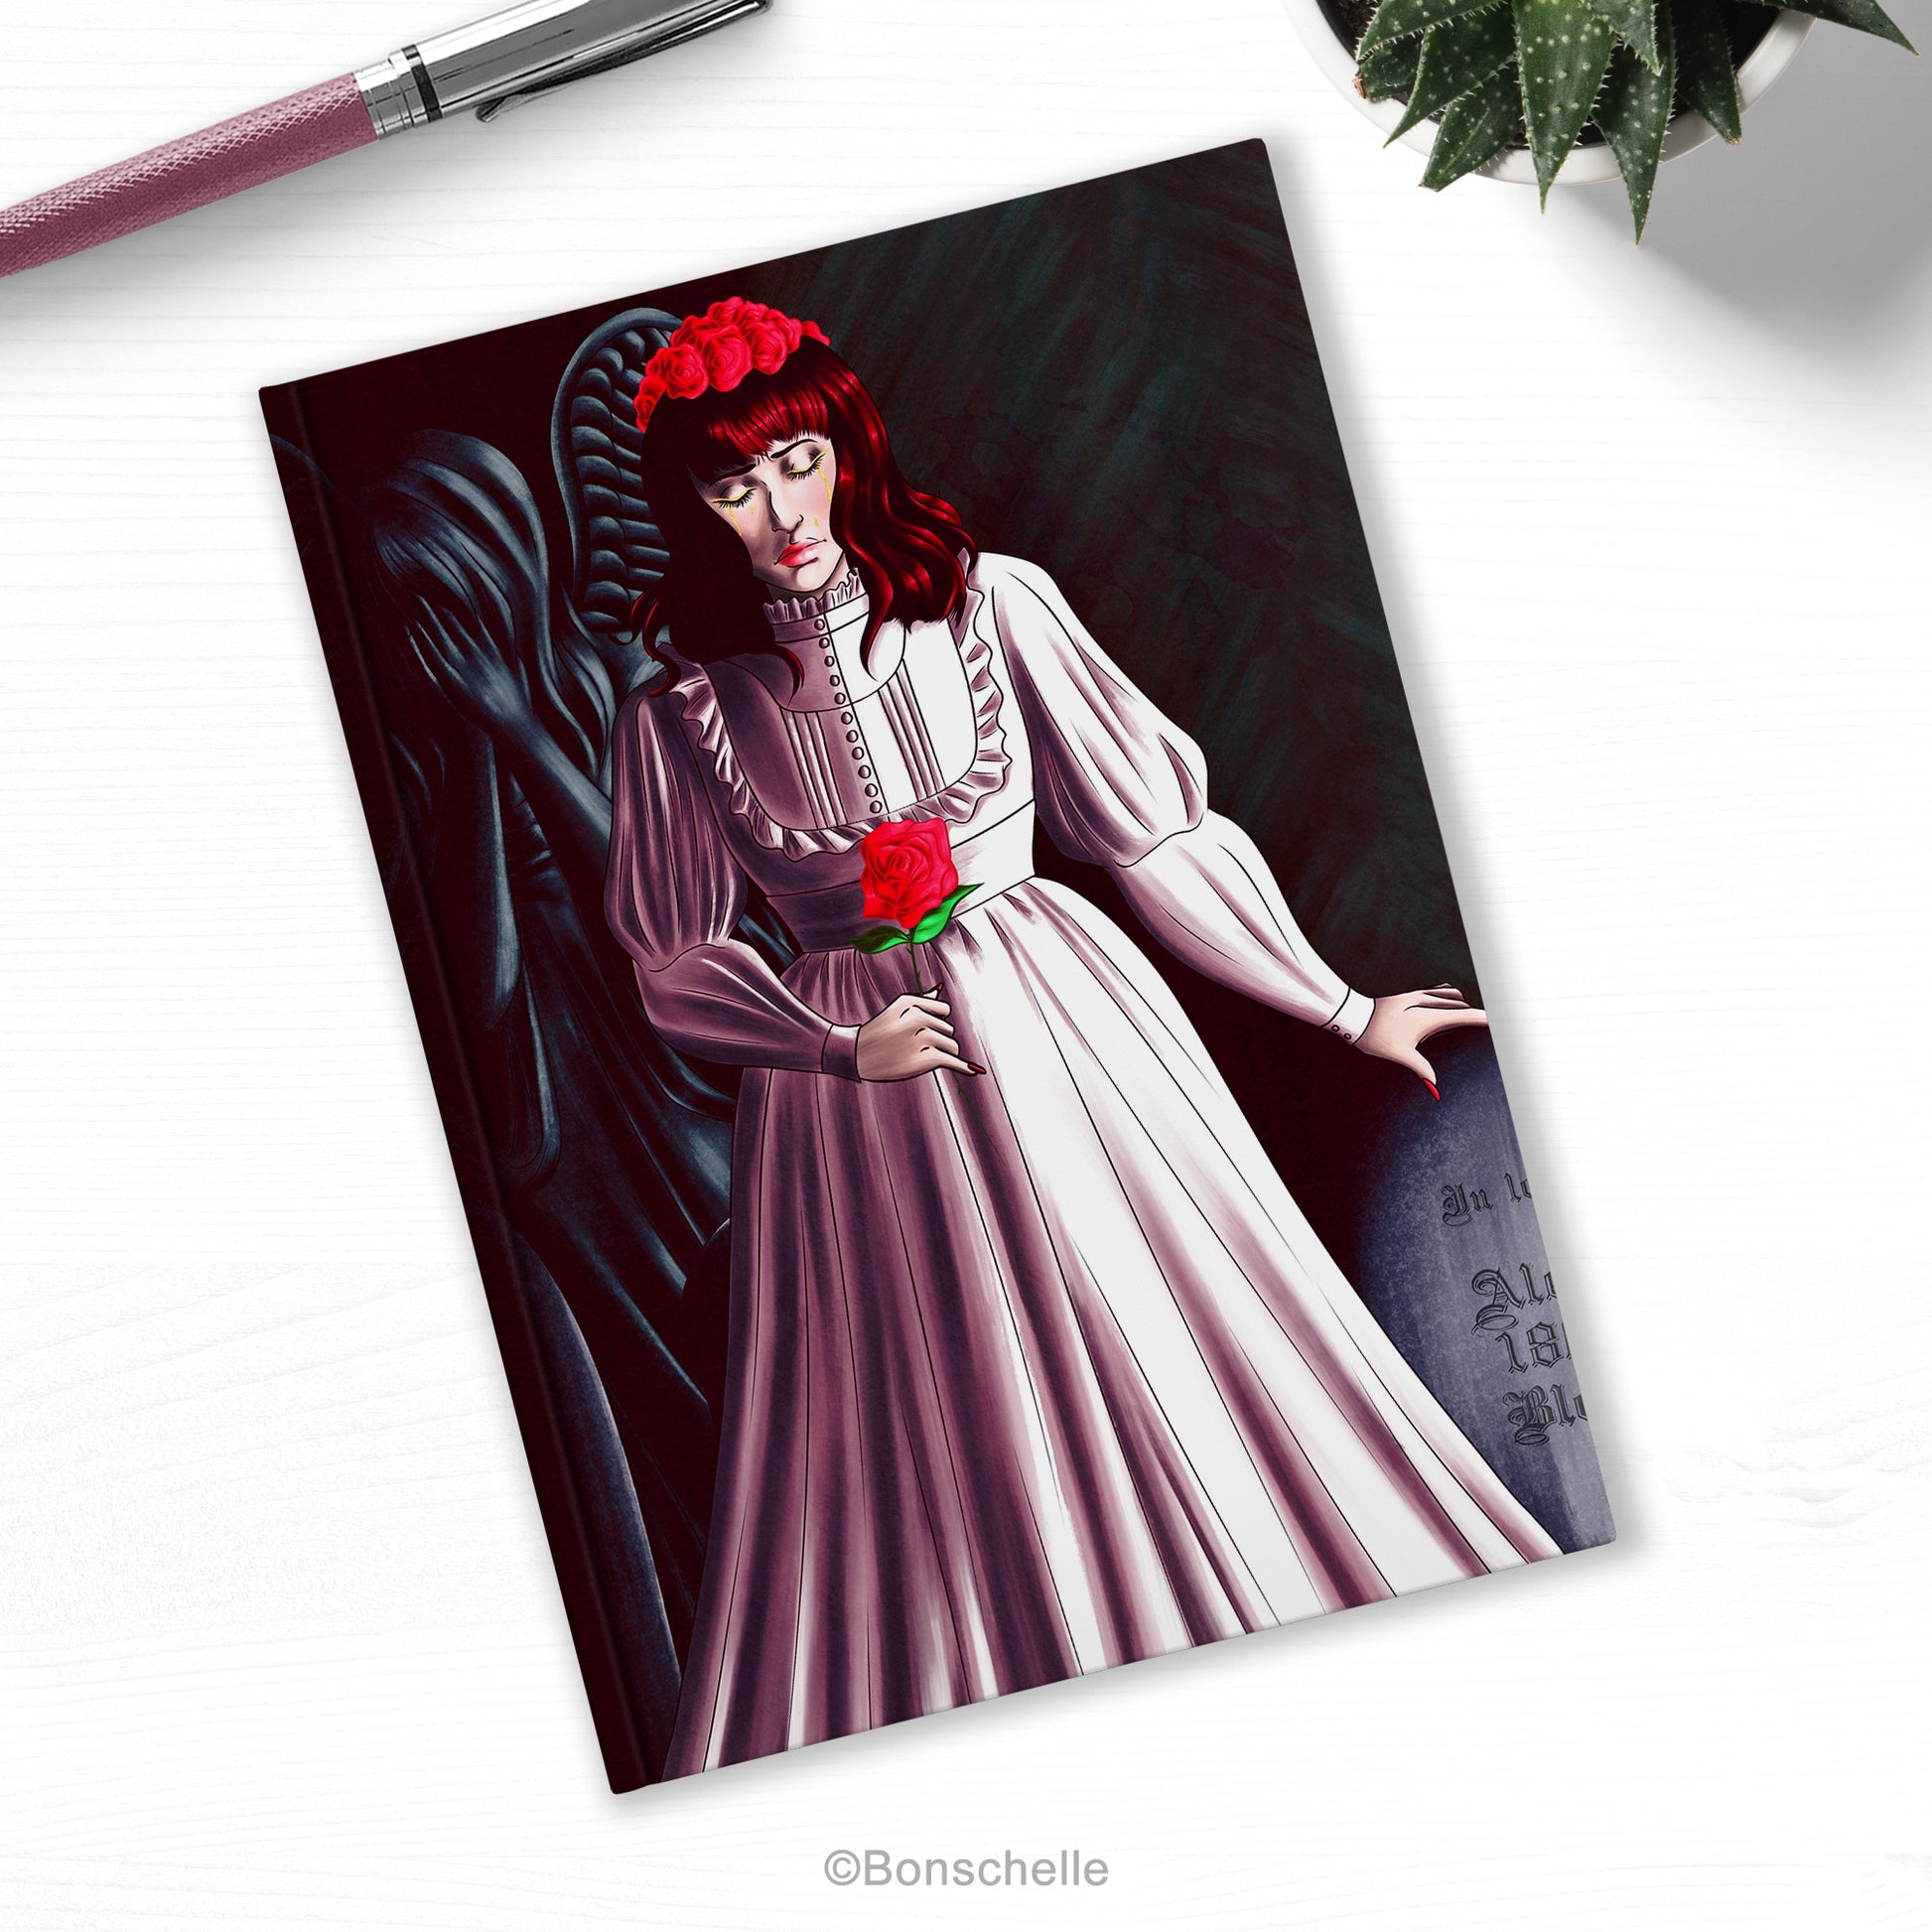 Vampire Lolita with Weeping Angel Illustrated Hardback Journal Notebook on a desk